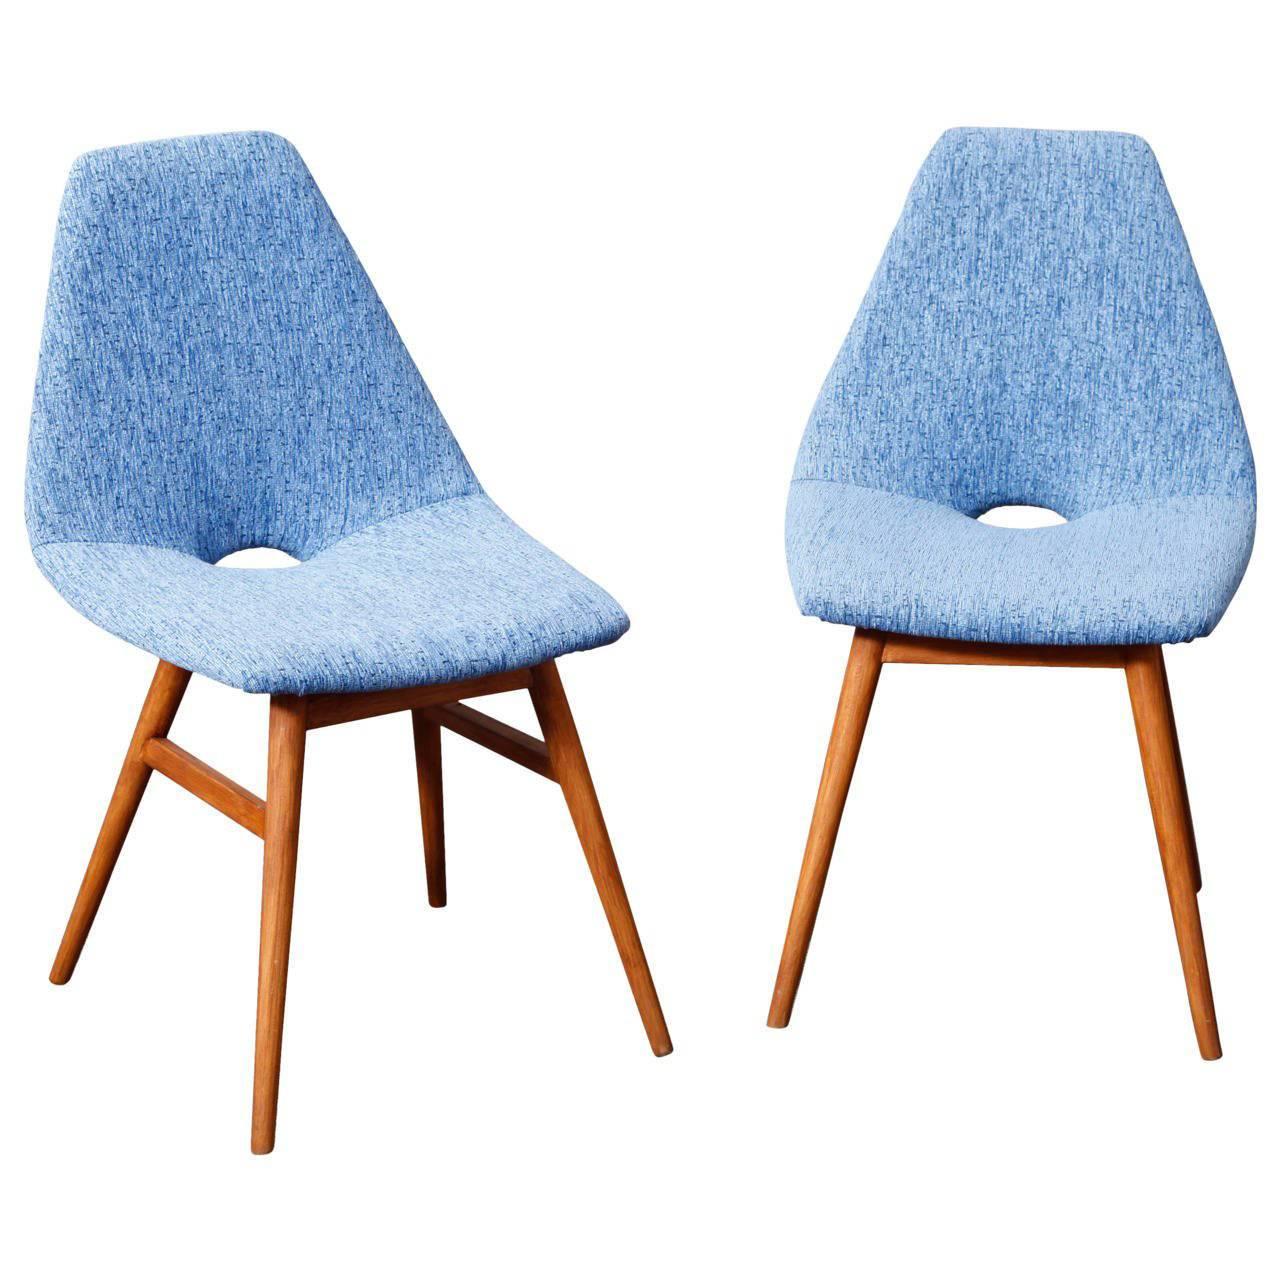 Pair of Erika Chairs by Judit Burian